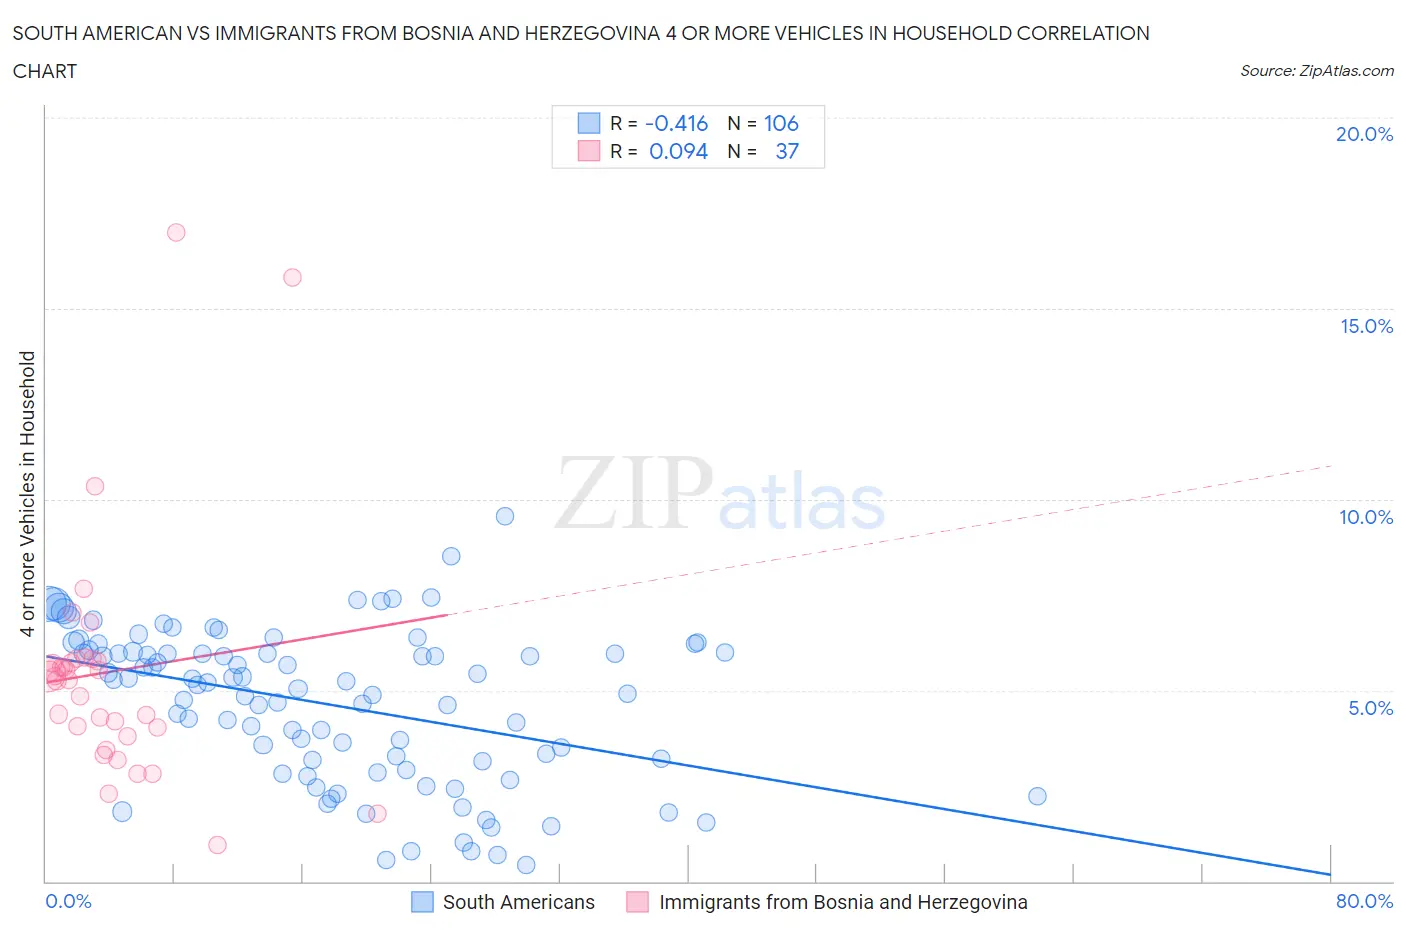 South American vs Immigrants from Bosnia and Herzegovina 4 or more Vehicles in Household